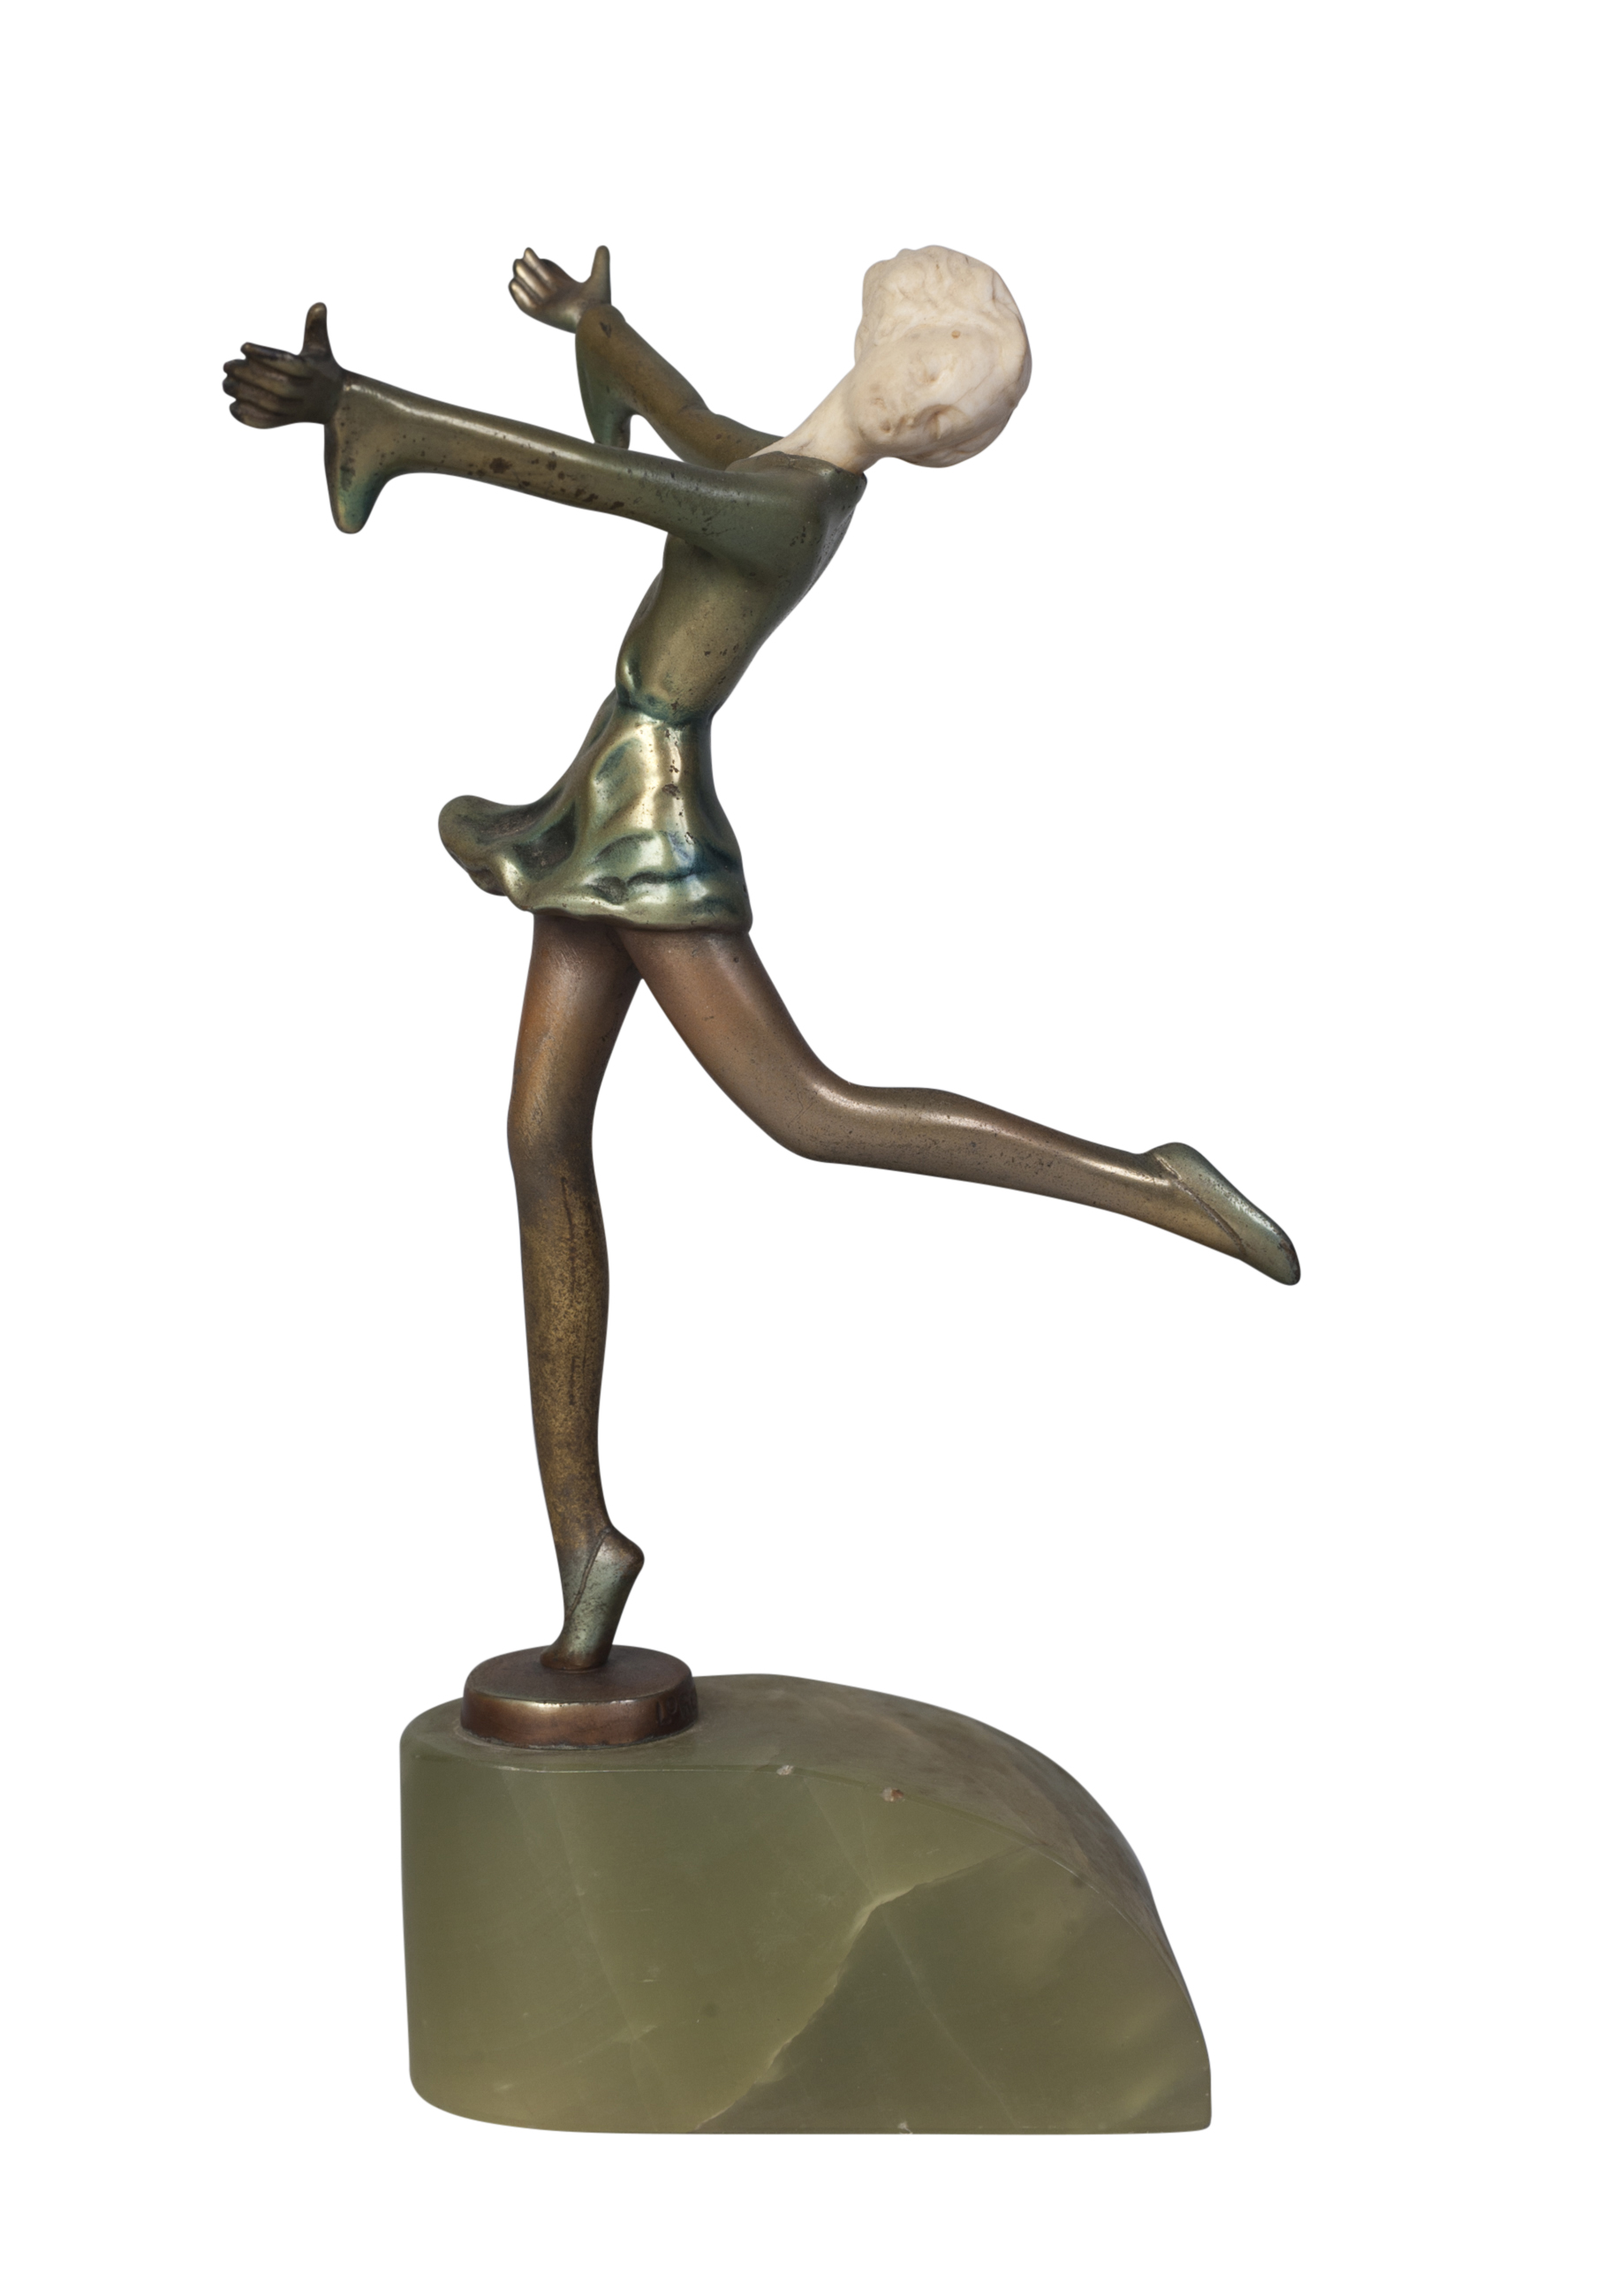 Josef Lorenzl (1892-1950), a cold-painted bronze and ivory figurec.1930, signed Lorenzl on bronze